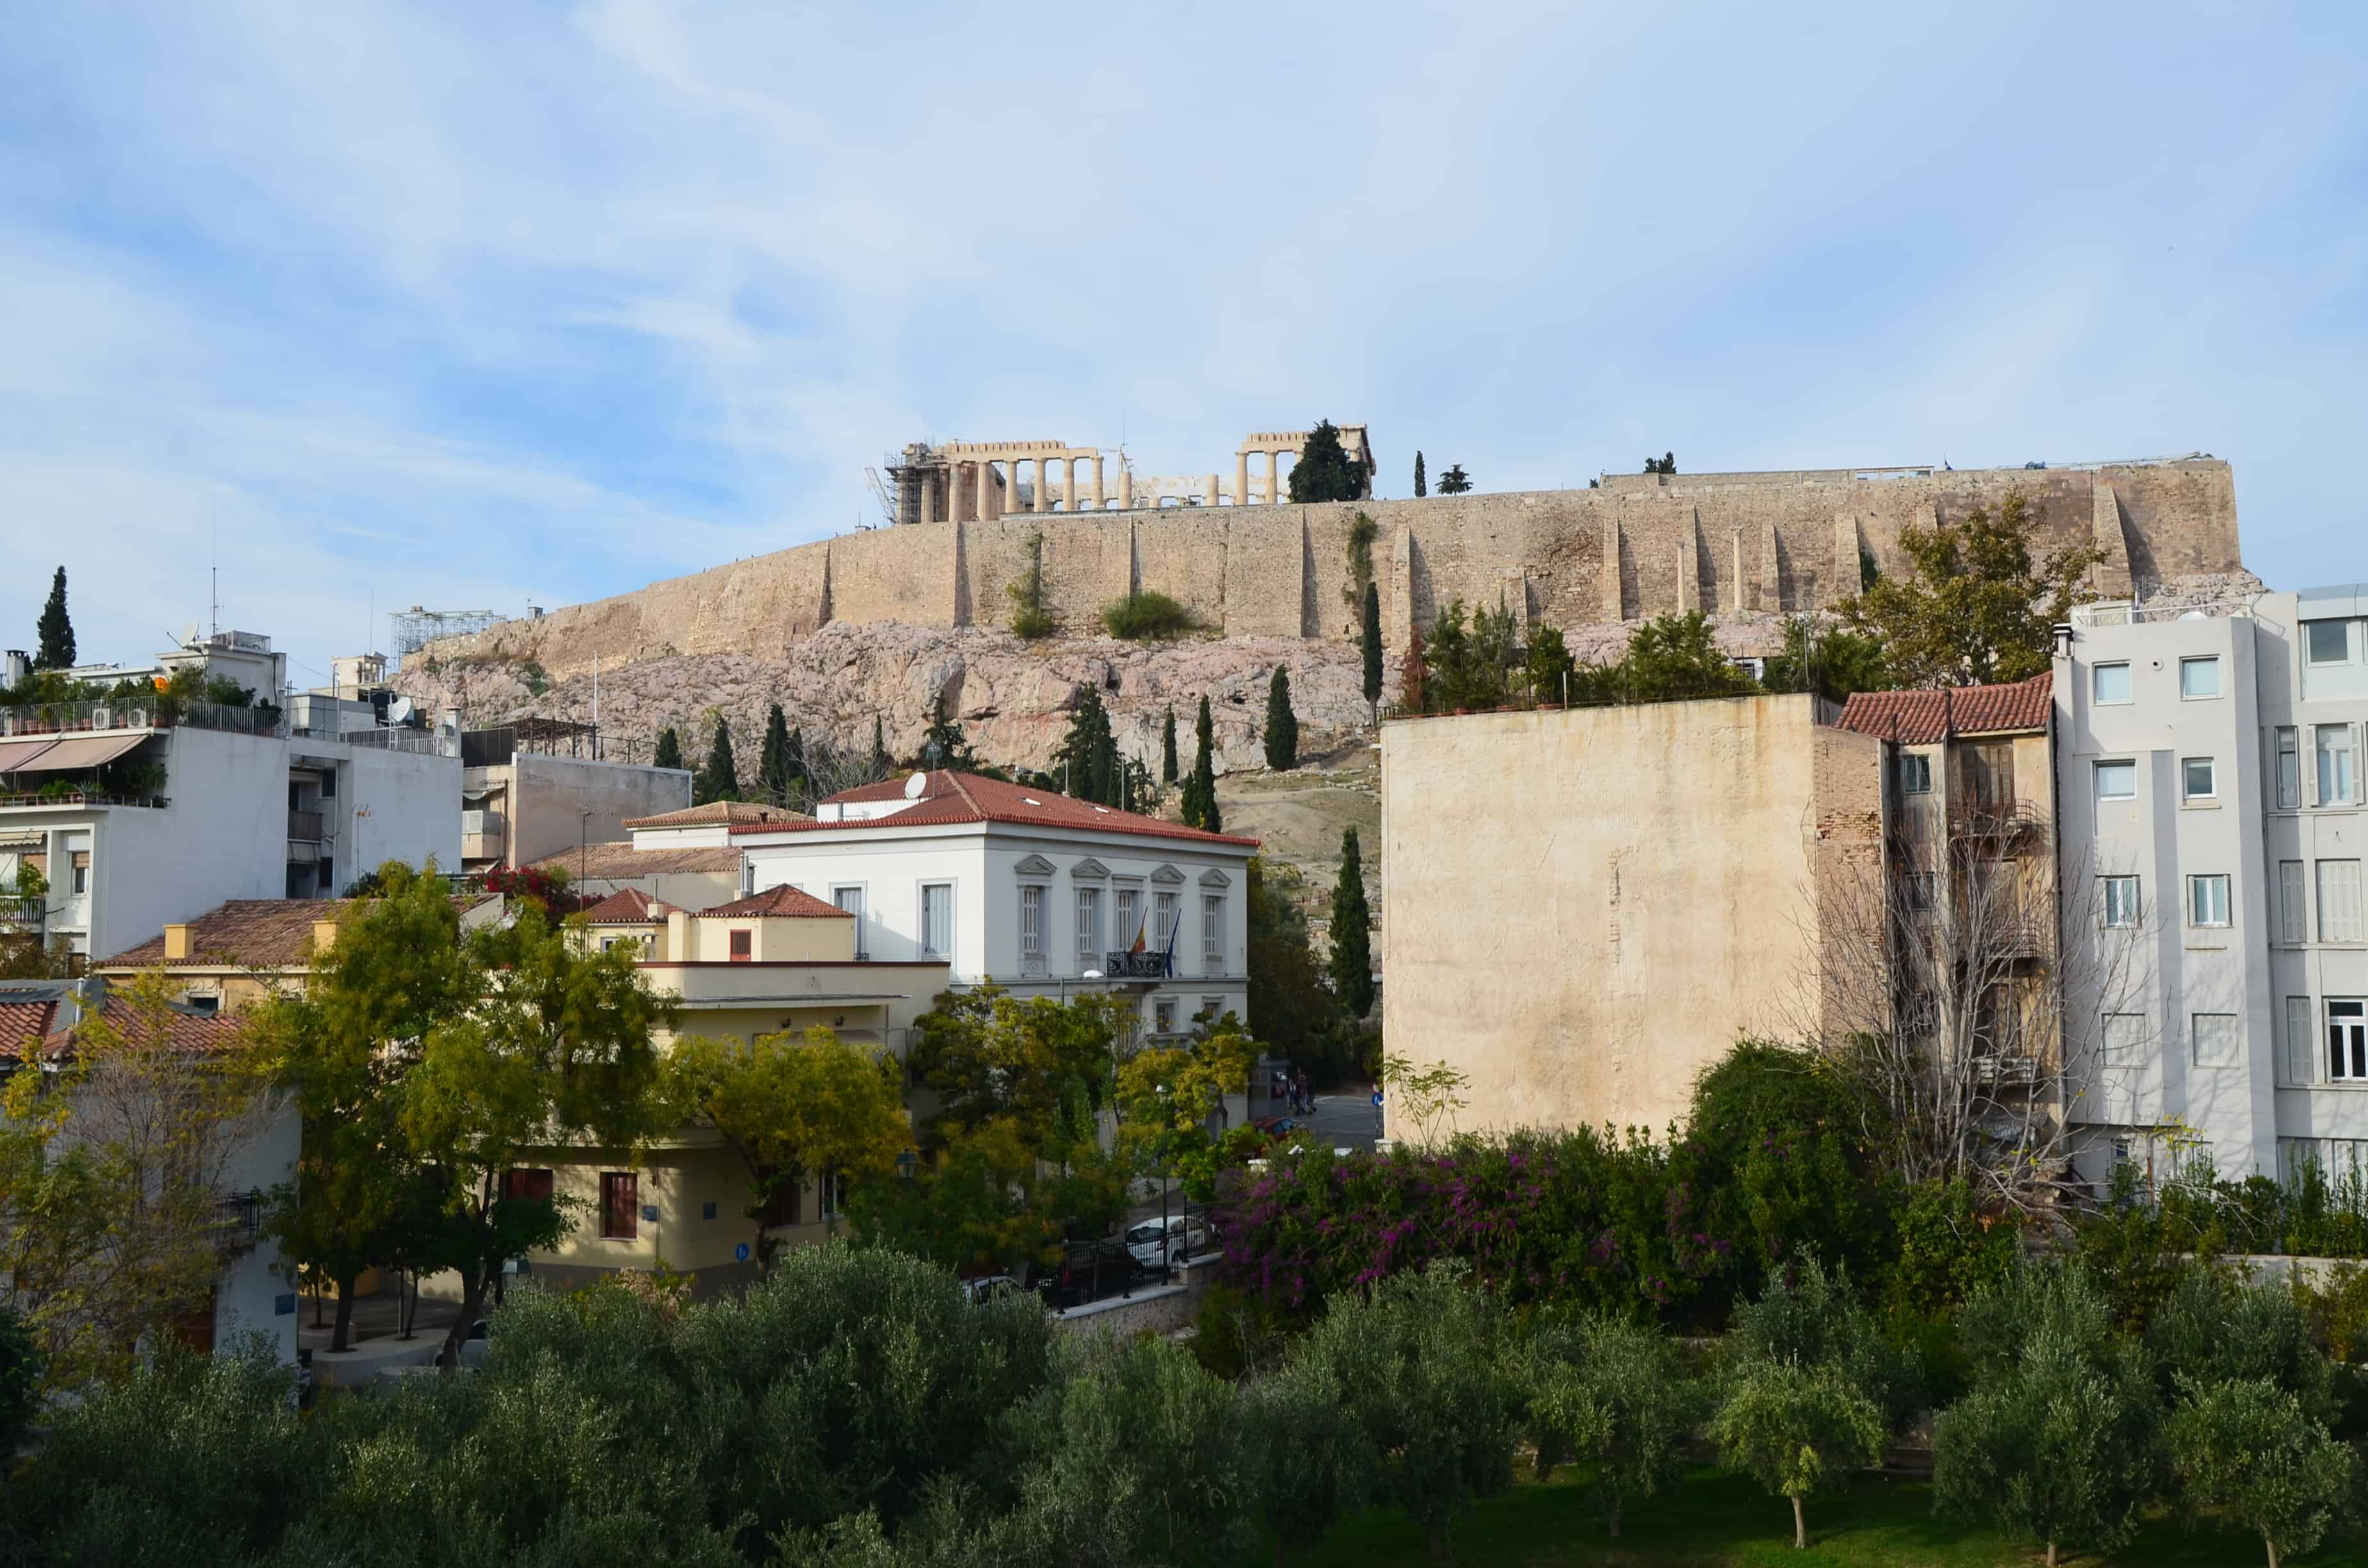 View from the terrace at the Acropolis Museum in Athens, Greece